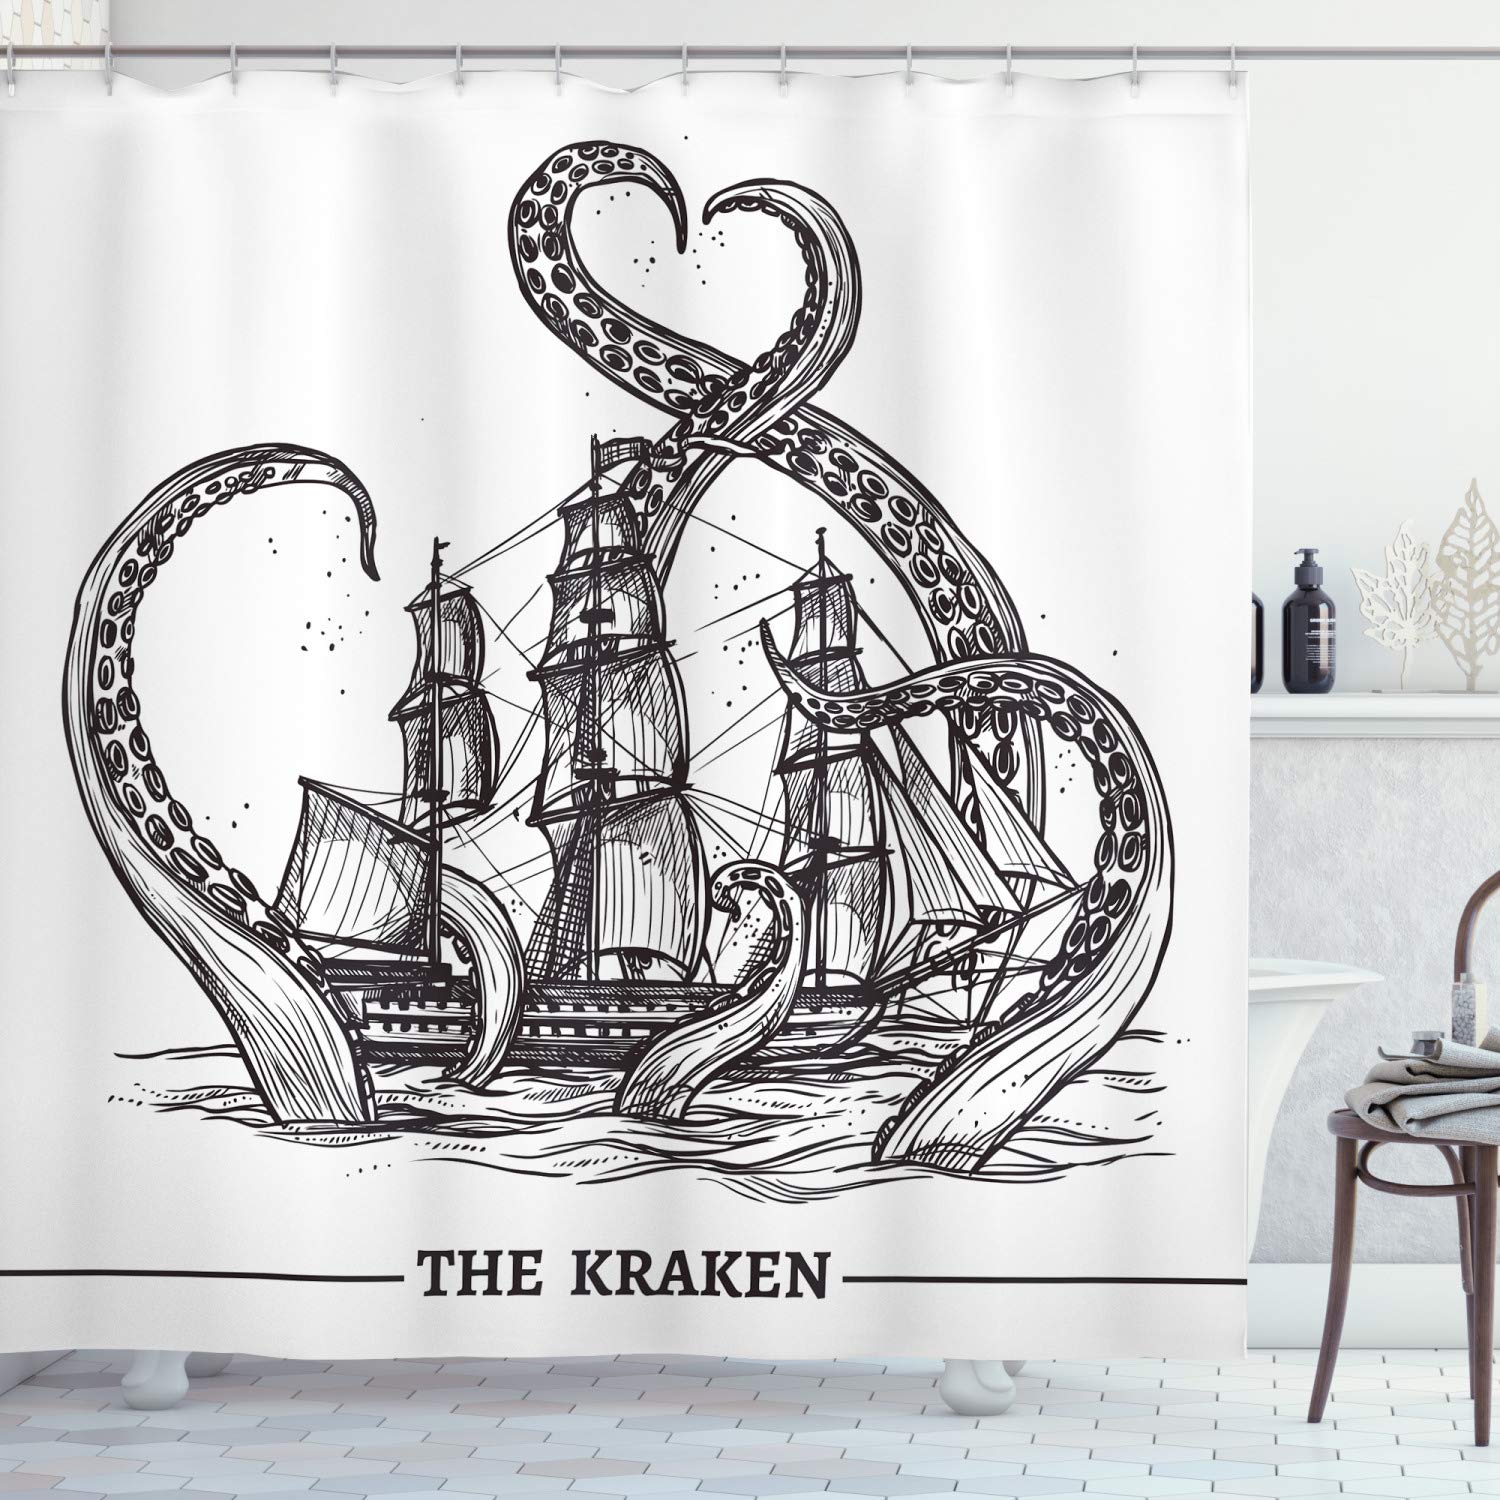 Ambesonne Nautical Decor Collection, Giant Octopus Catches Old Style Sail Ship Monster Adventure Story Themed Image, Polyester Fabric Bathroom Shower Curtain Set with Hooks, Black And White